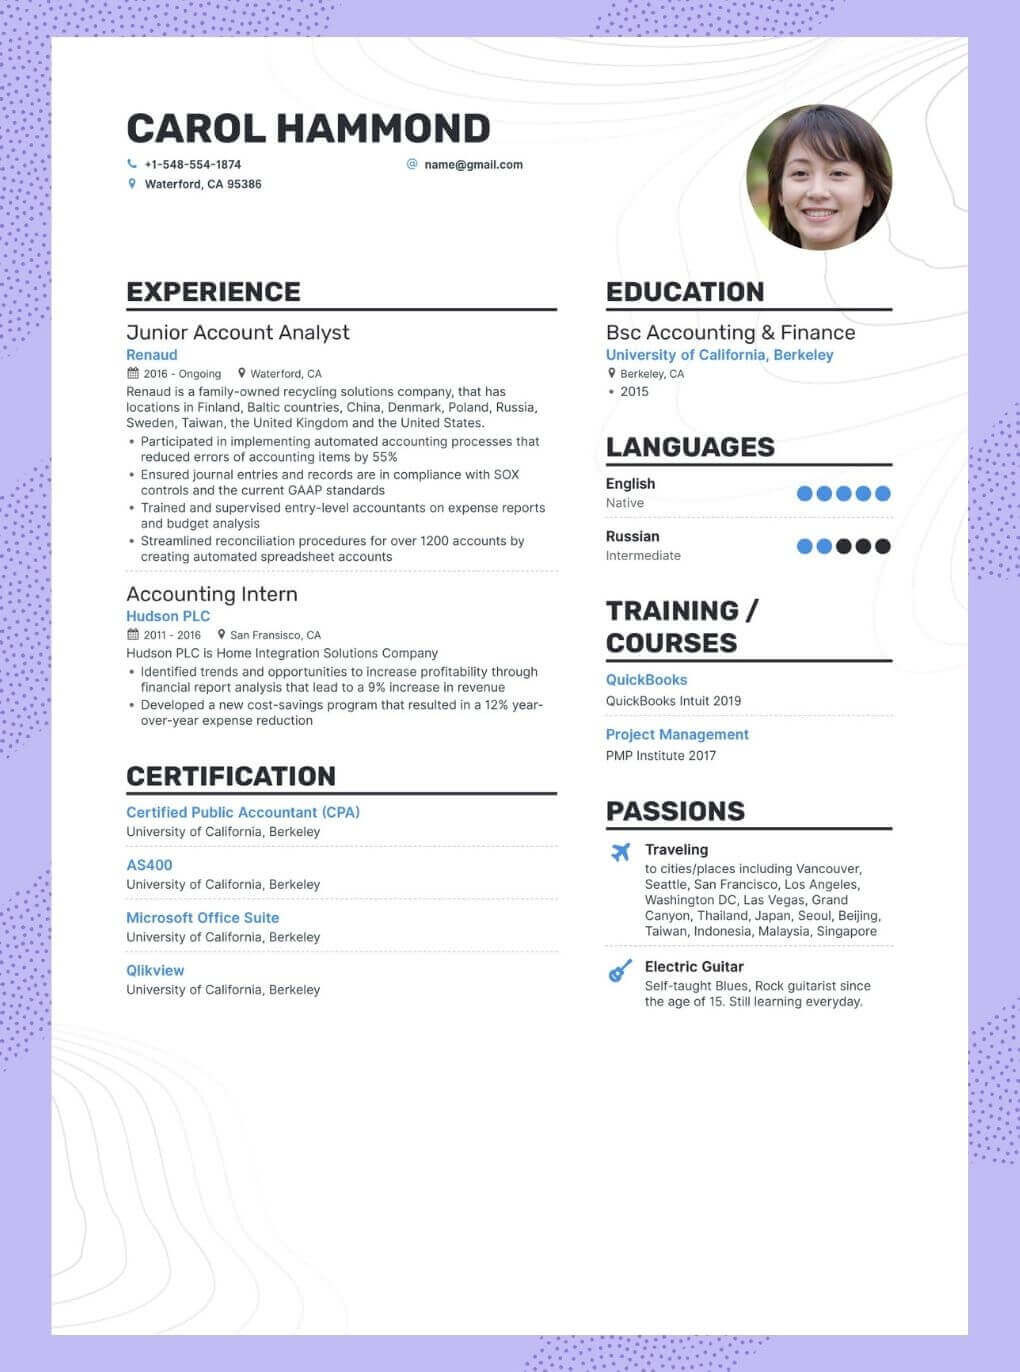 Sample Resume with Application Type Details Resume Job Description: Samples & Tips to Help You Enhance Your …